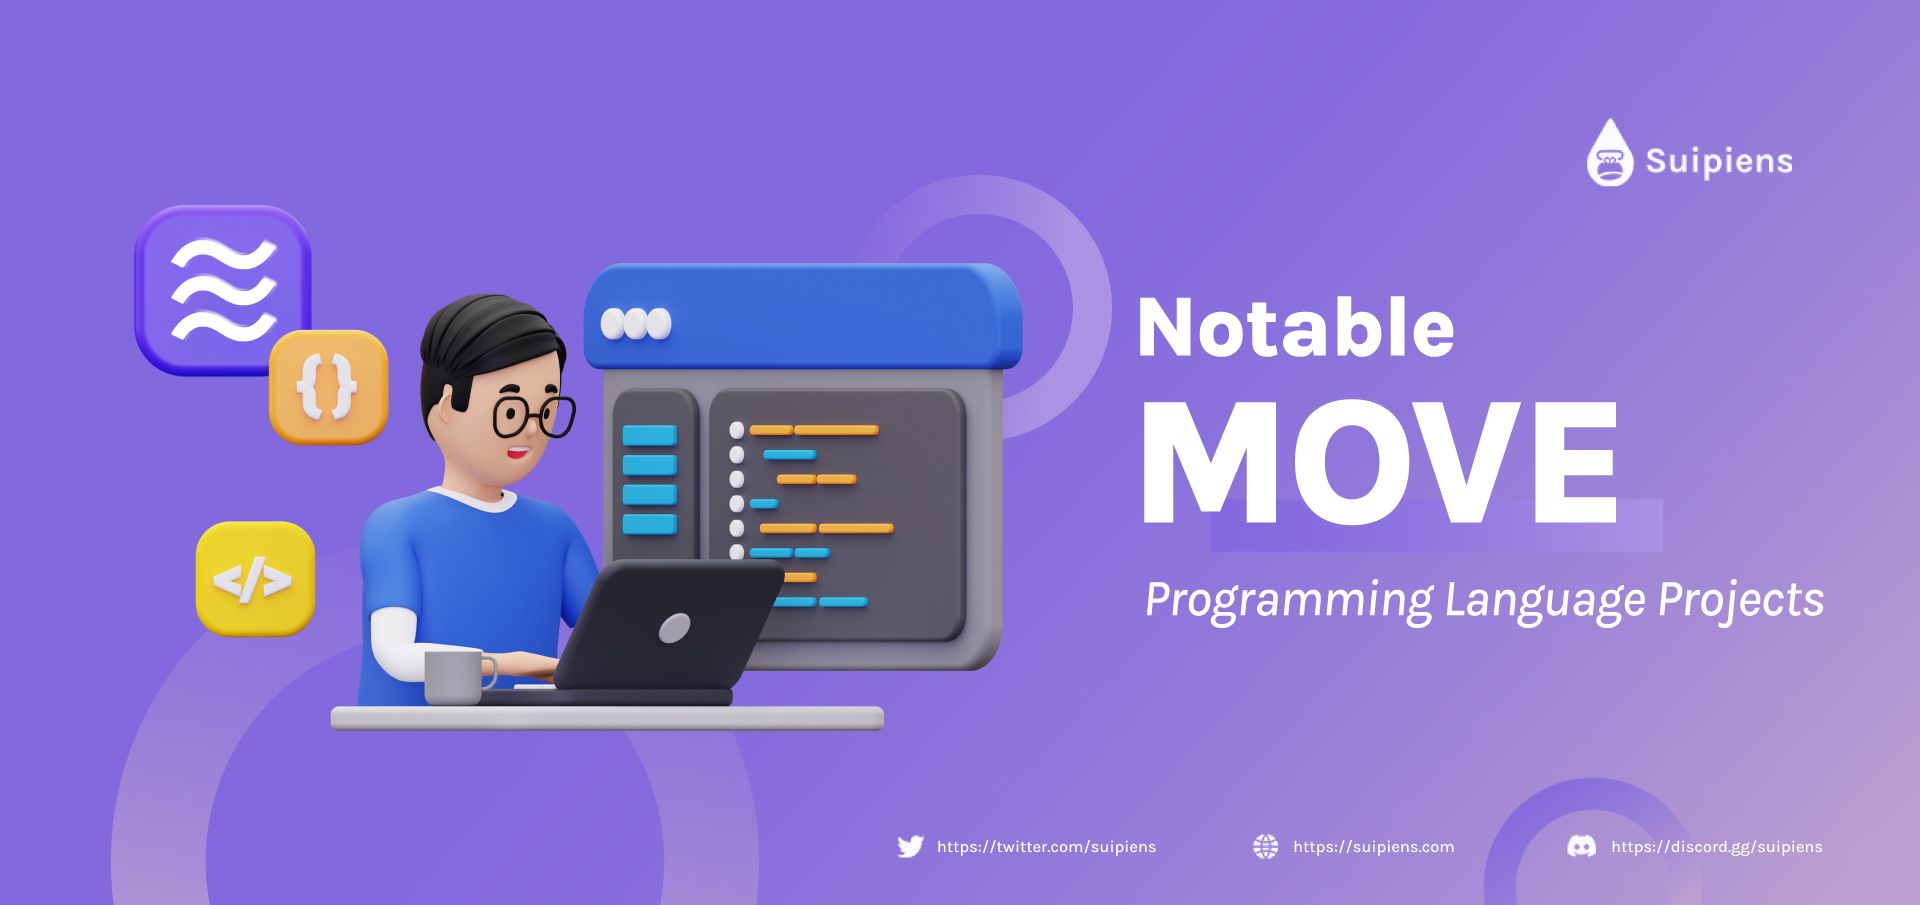 Notable Move Programming Language Projects